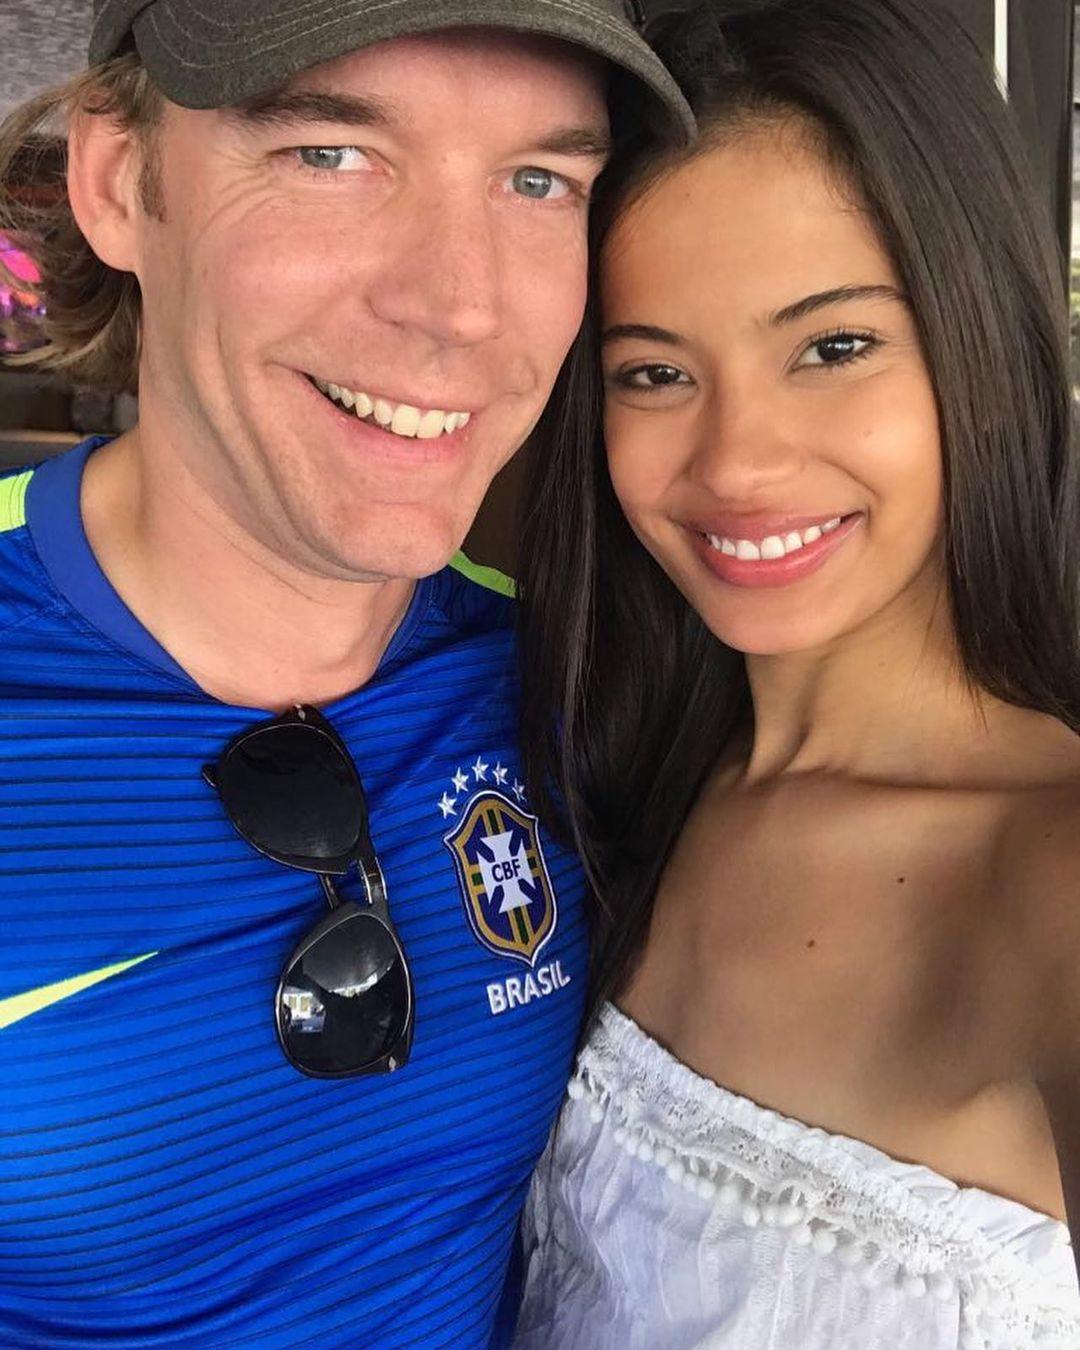 90 Day Fiancé' Stars Michael Jessen And Juliana Custodio Call It Quits On Their Scond Anniversary